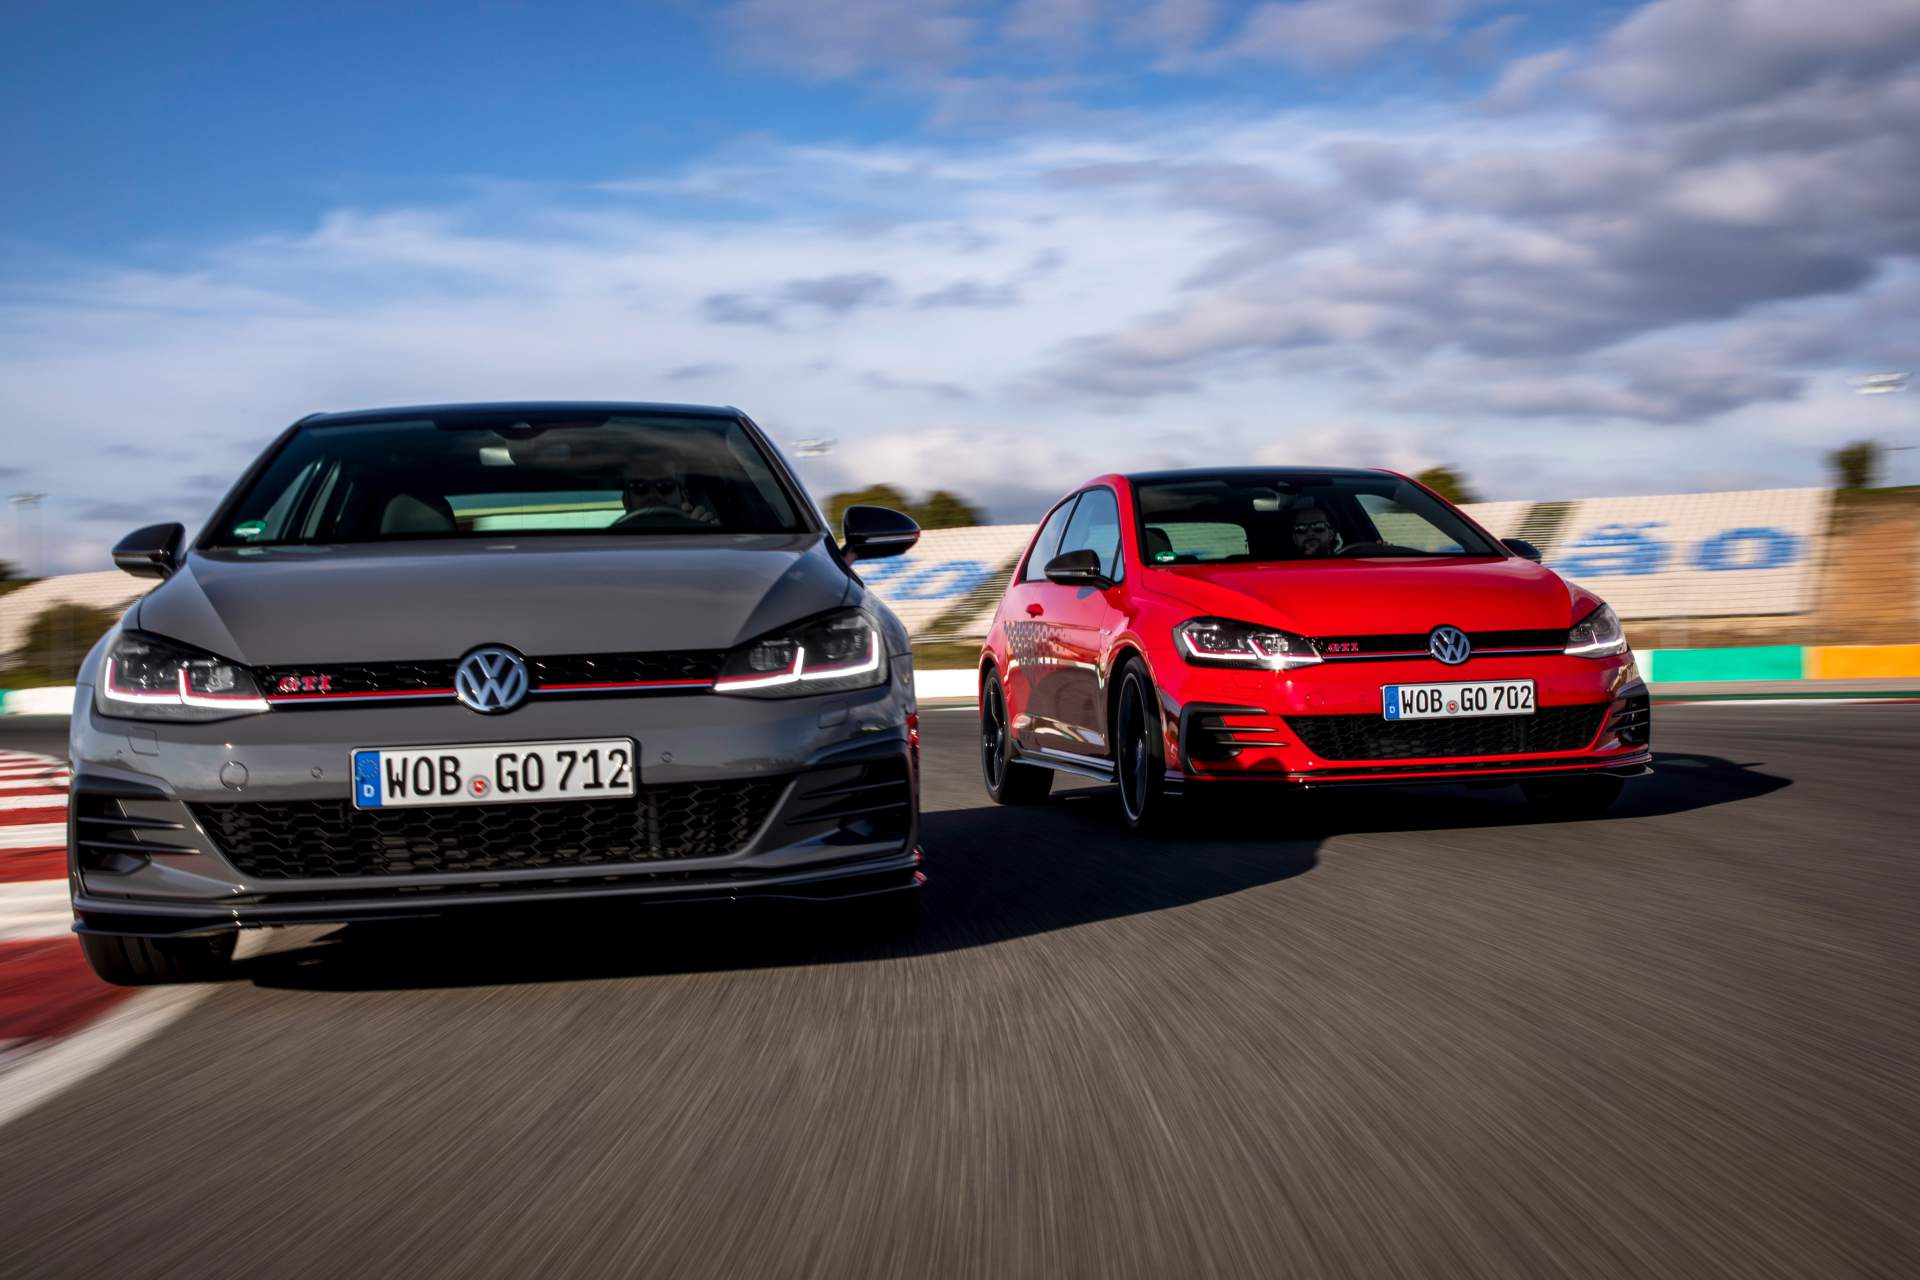 2019 Volkswagen Golf GTI TCR Has “The Genes Of A Race Car” - autoevolution